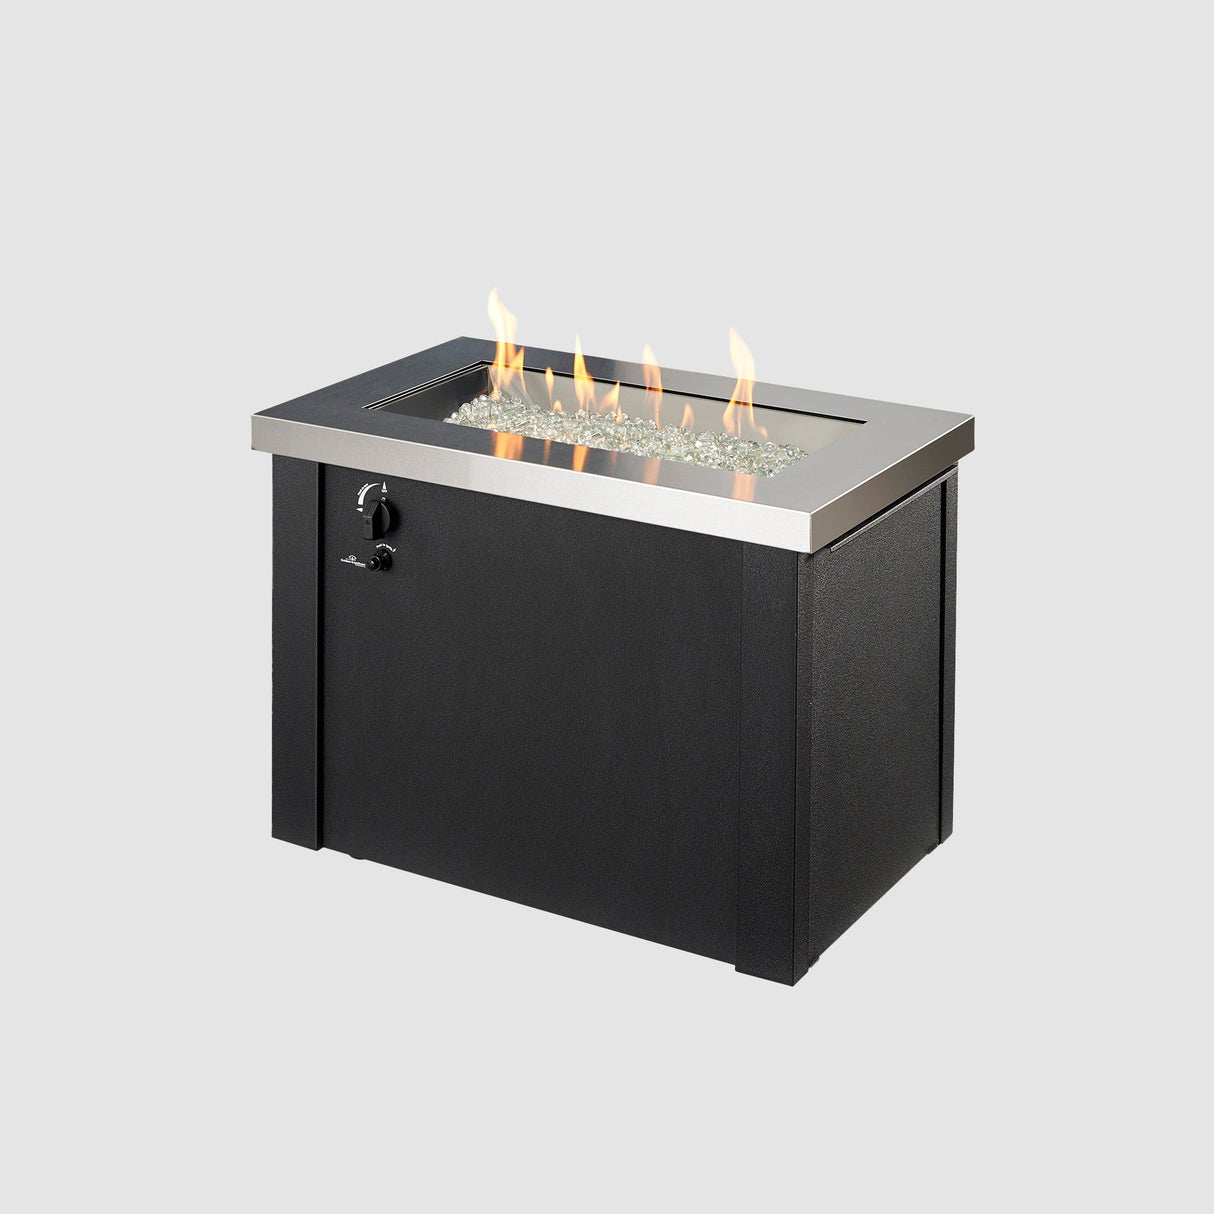 Providence Rectangular Gas Fire Pit Table on a grey background